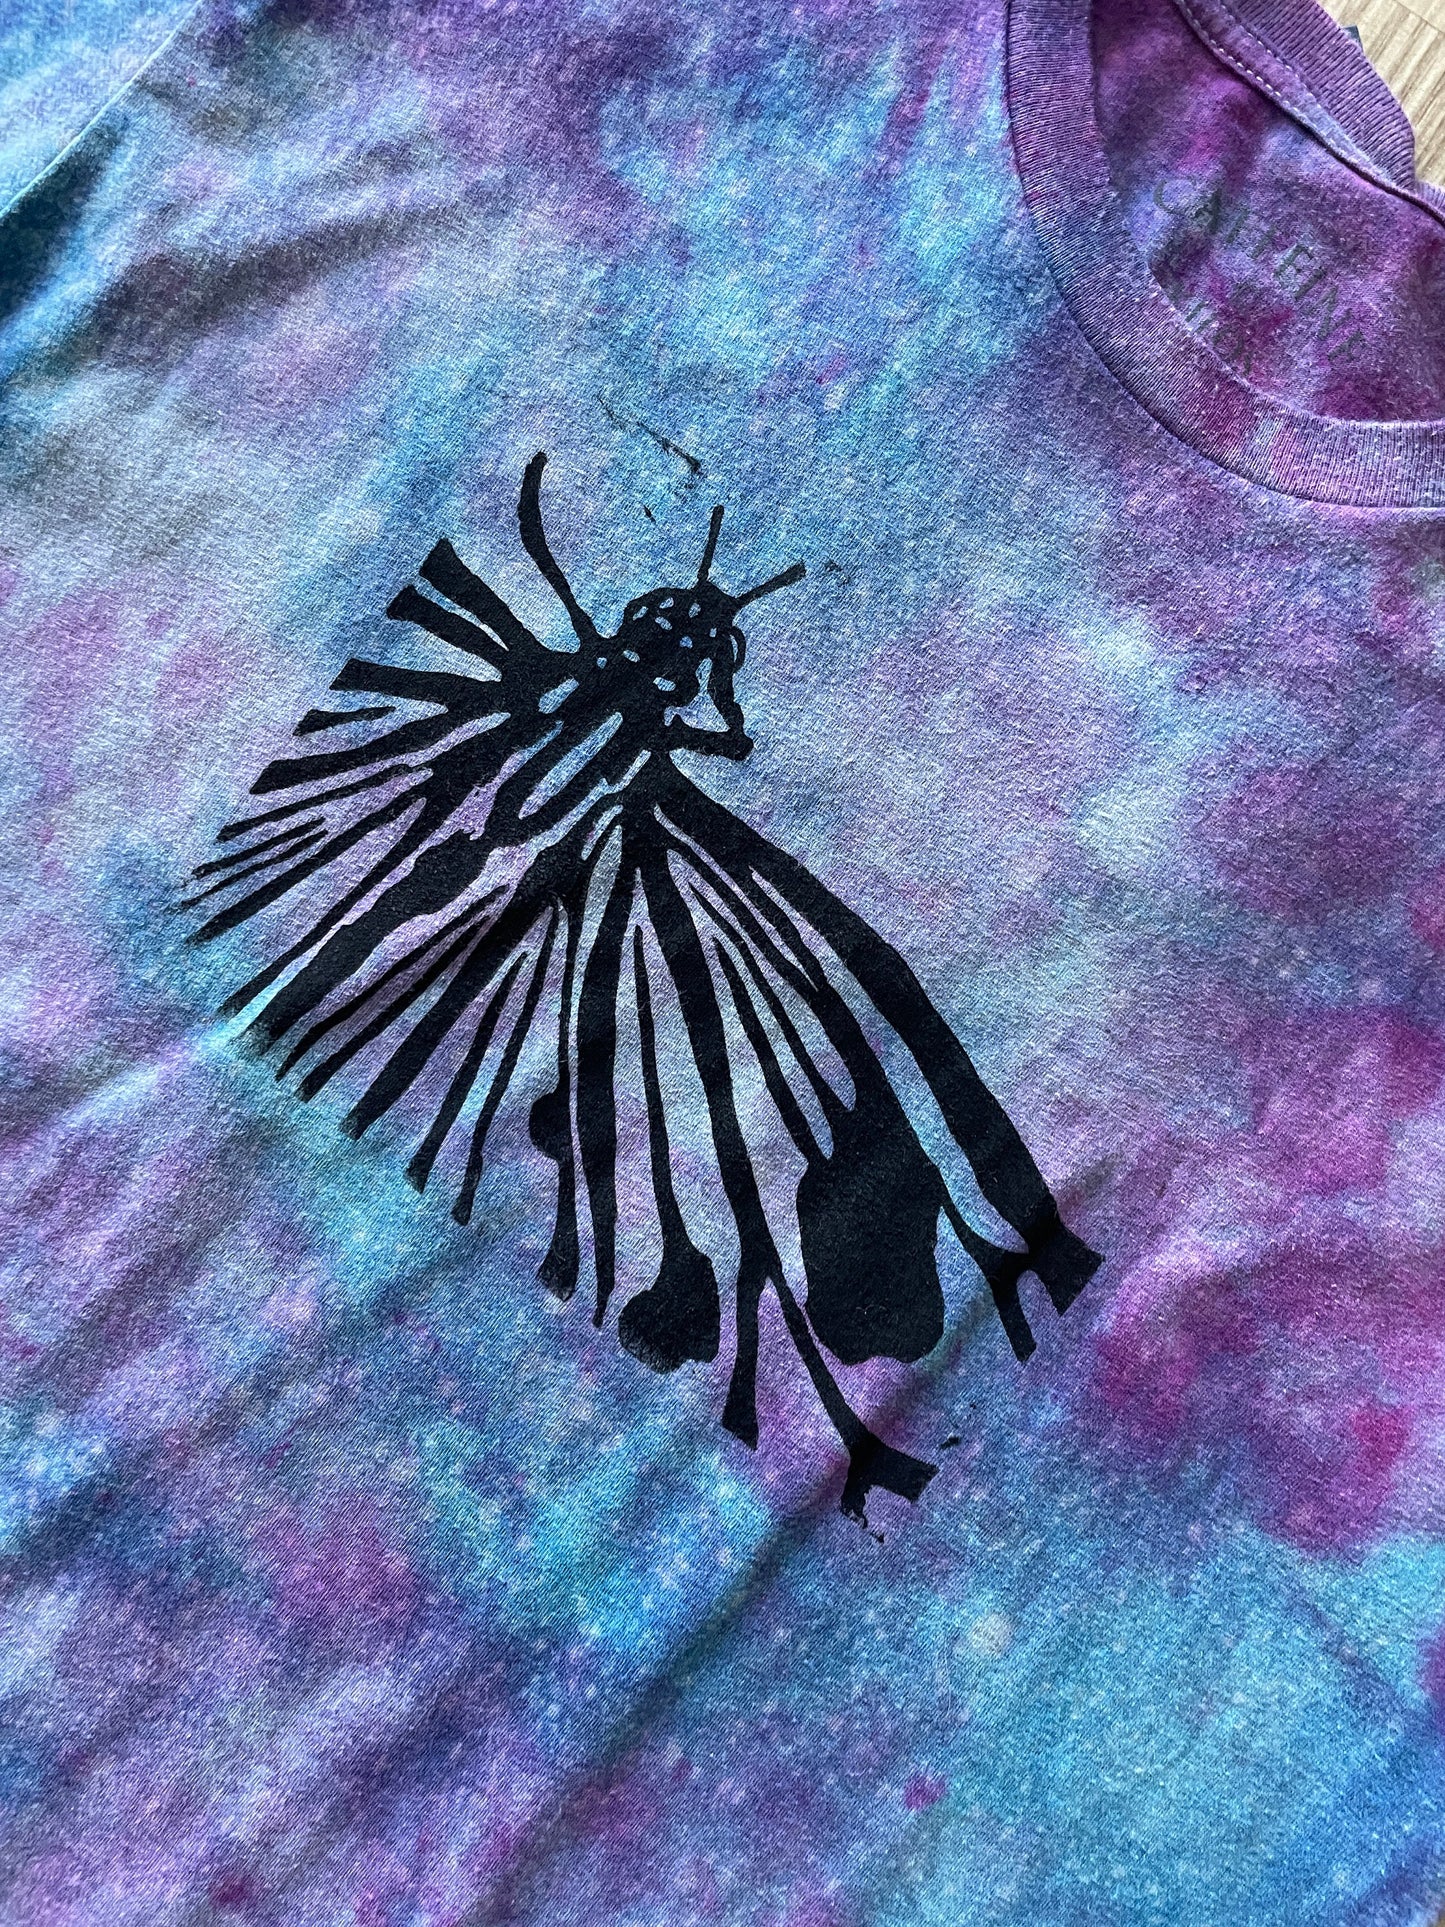 Medium Men's Hand-Printed Butterfly Galaxy Tie Dye Short Sleeve T-Shirt | Handmade One-Of-a-Kind Upcycled Blue, Purple, and Pink Ice Dye